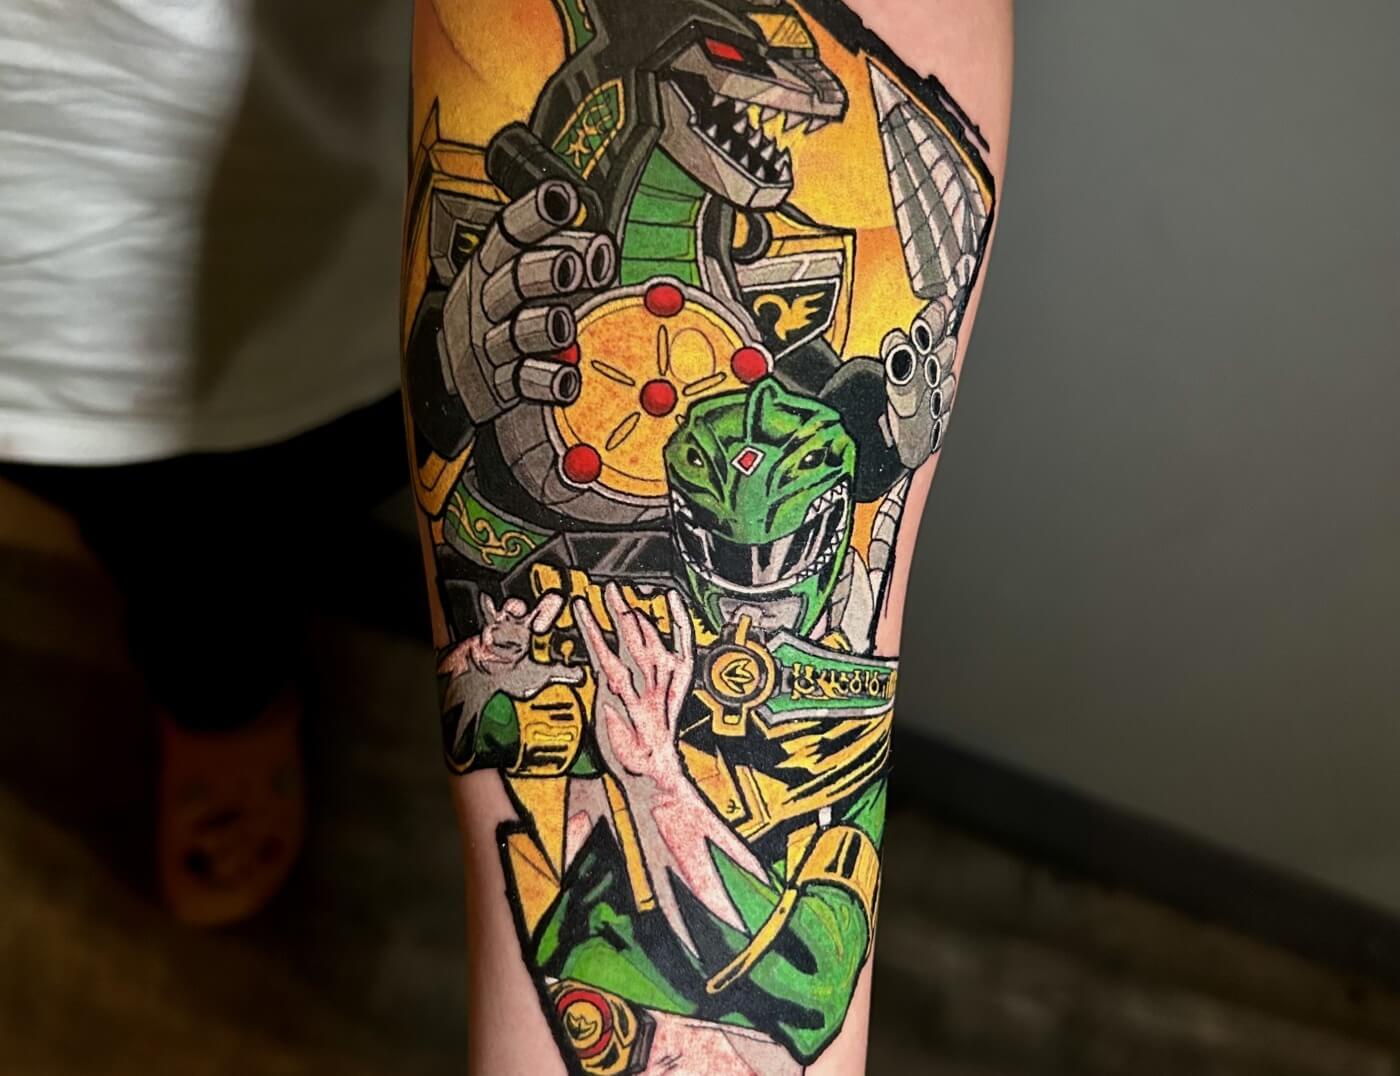 Green Power Ranger & Dragonzord Anime Tattoo In Tribute to the late Jason David Frank by Lyric TheArtist at Iron Palm Tattoos in Atlanta. Jason is best remembered for his role as the green power ranger and had lead roles in all of the Power Ranger's television series. He was also a well known martial artist.We're open late night til 2AM most nights. Stop by for a free consultation with Lyric or another Iron Palm body artist. Call 404-973-7828 or stop by for a free consultation. Walk ins are welcome.